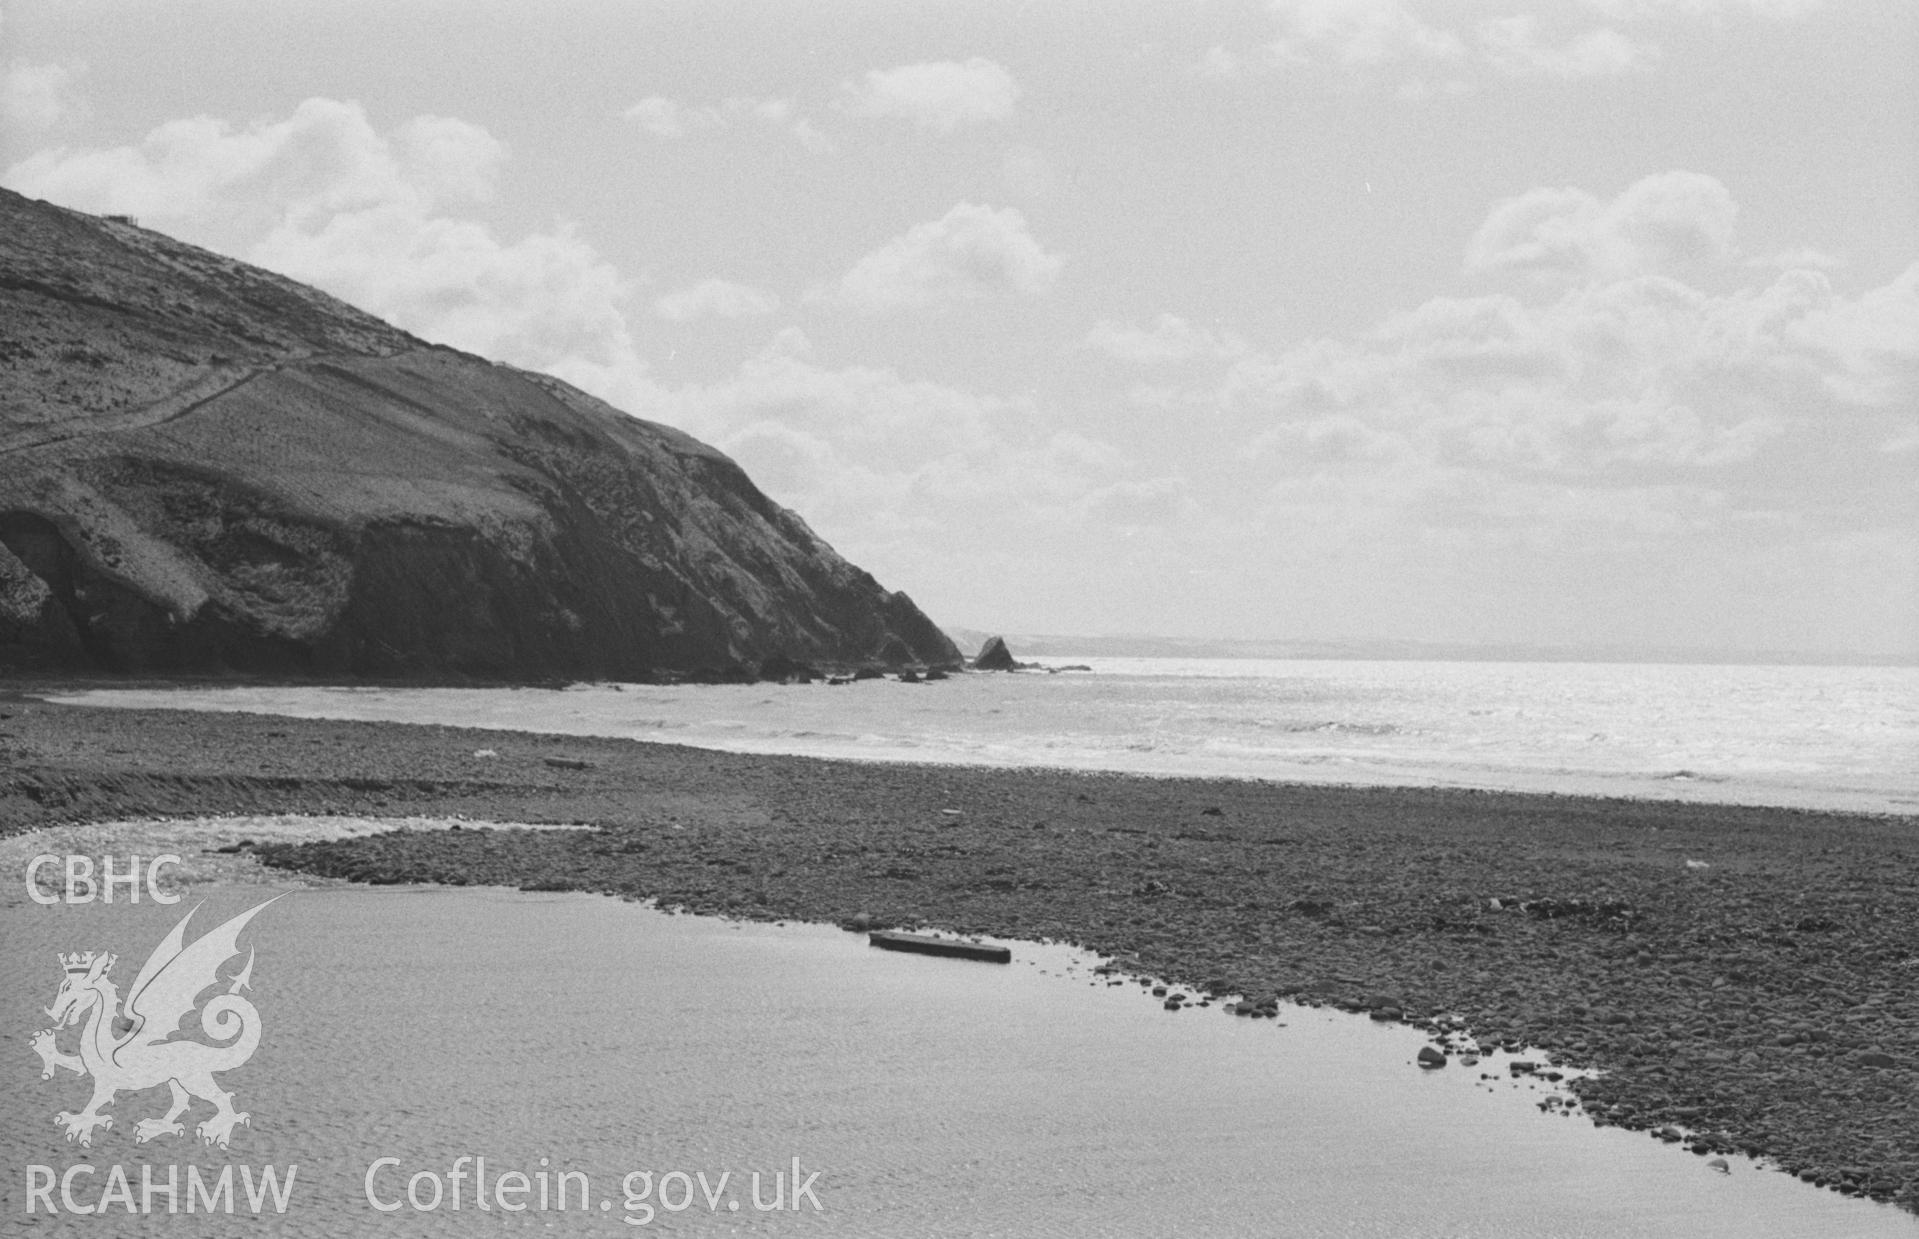 Digital copy of a black and white negative showing dammed up part of Afon Clarach on Clarach beach, Craigyfulfran beyond. Photographed by Arthur O. Chater on 2nd April 1968, looking south south west from Grid Reference SN 587 840.